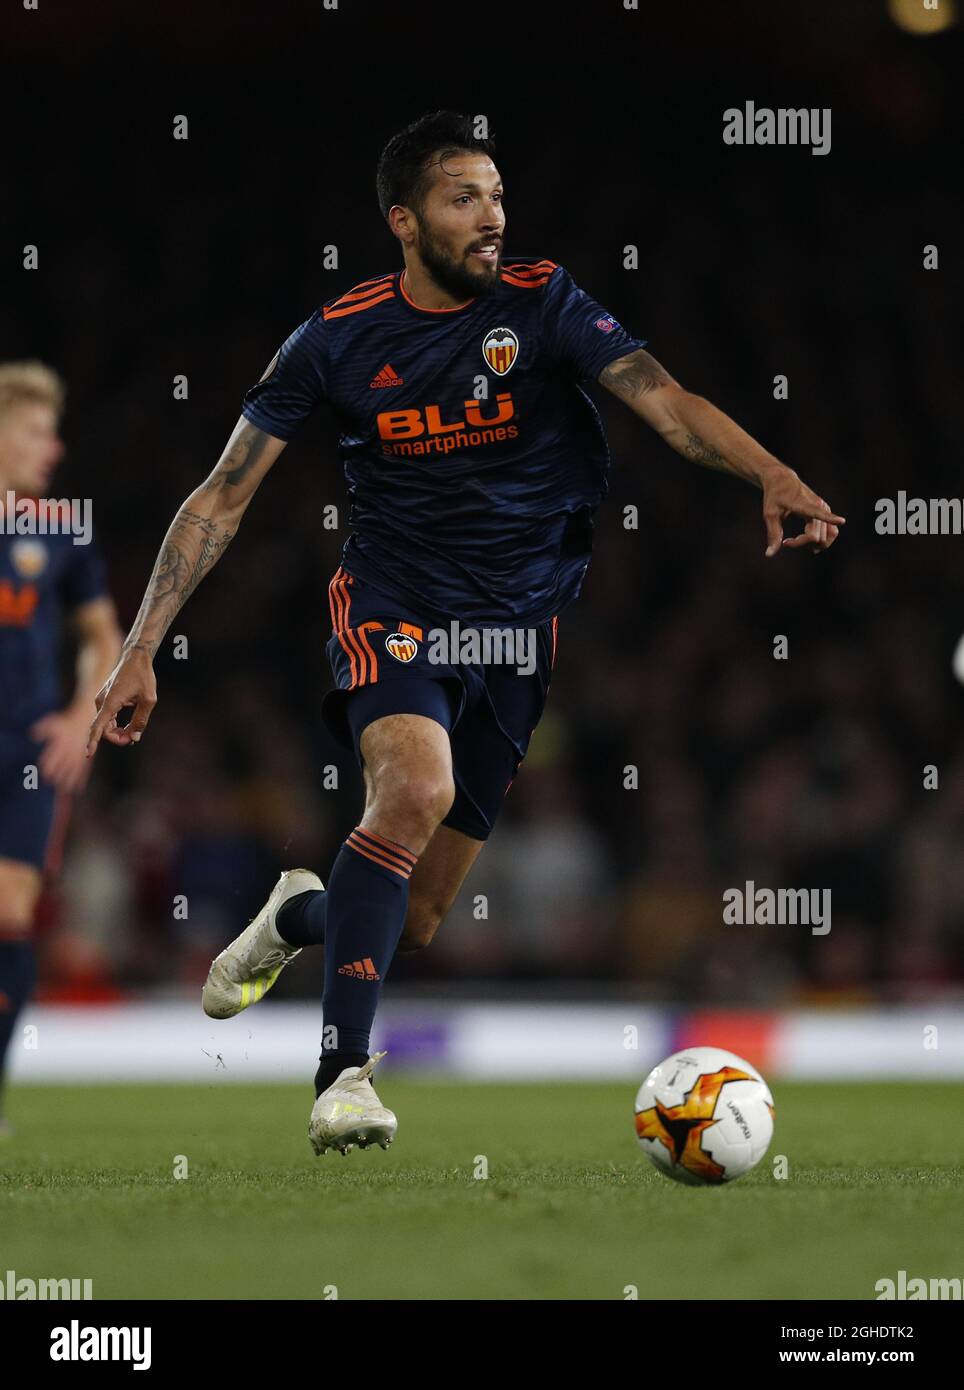 Ezequiel Garay of Valencia during the UEFA Europa League match at the Emirates Stadium, London. Picture date: 2nd May 2019. Picture credit should read: Darren Staples/Sportimage via PA Images Stock Photo